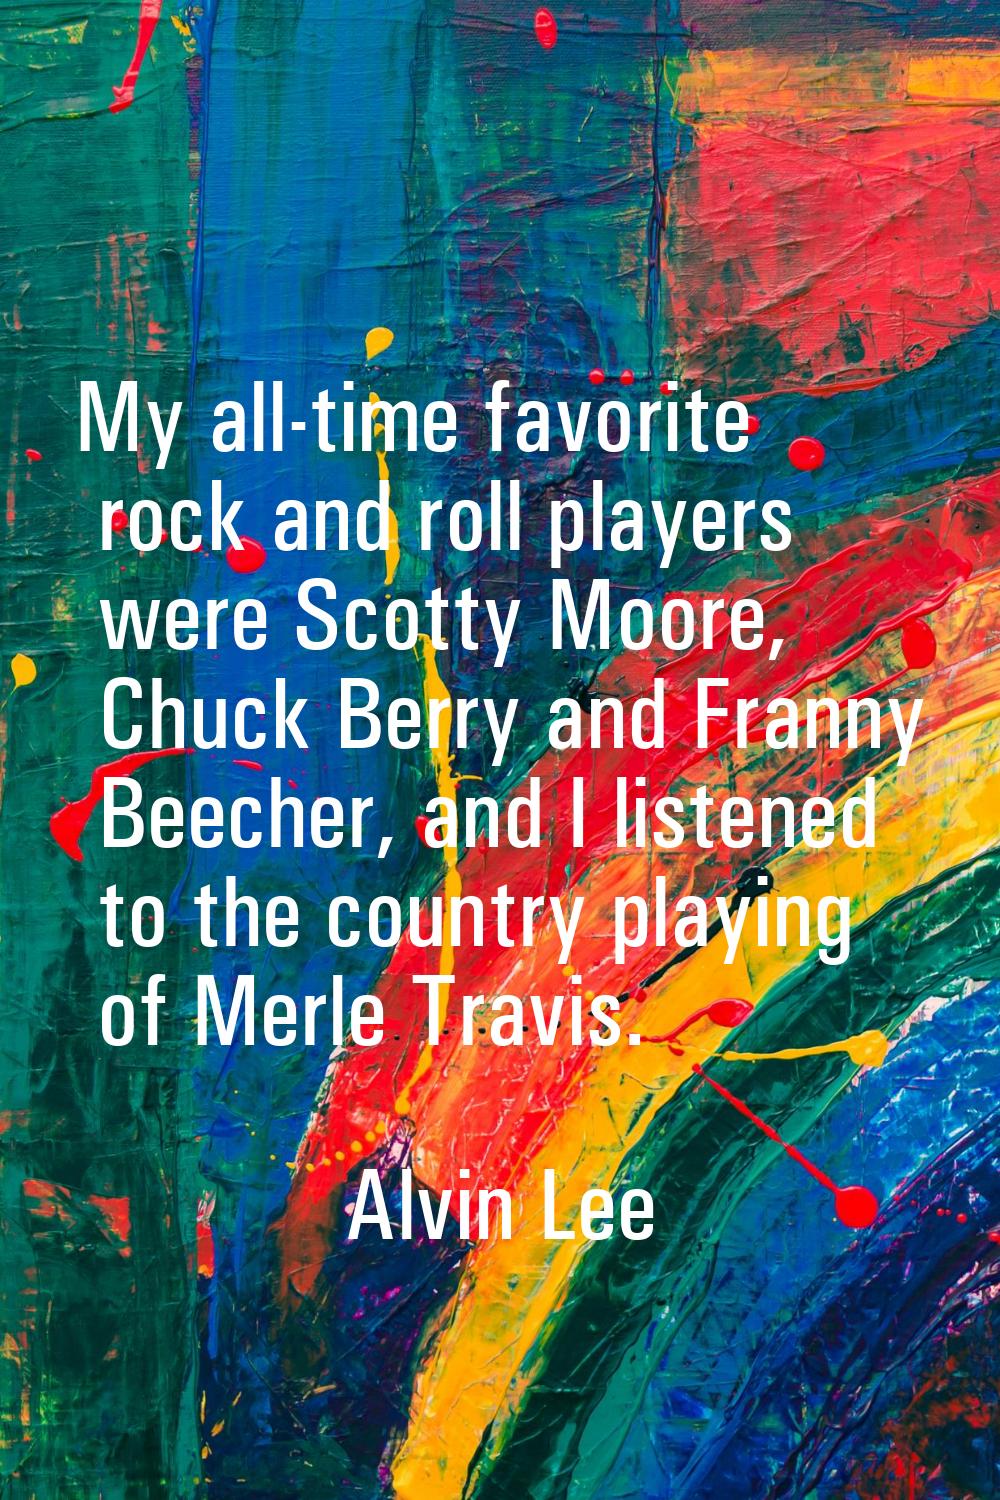 My all-time favorite rock and roll players were Scotty Moore, Chuck Berry and Franny Beecher, and I